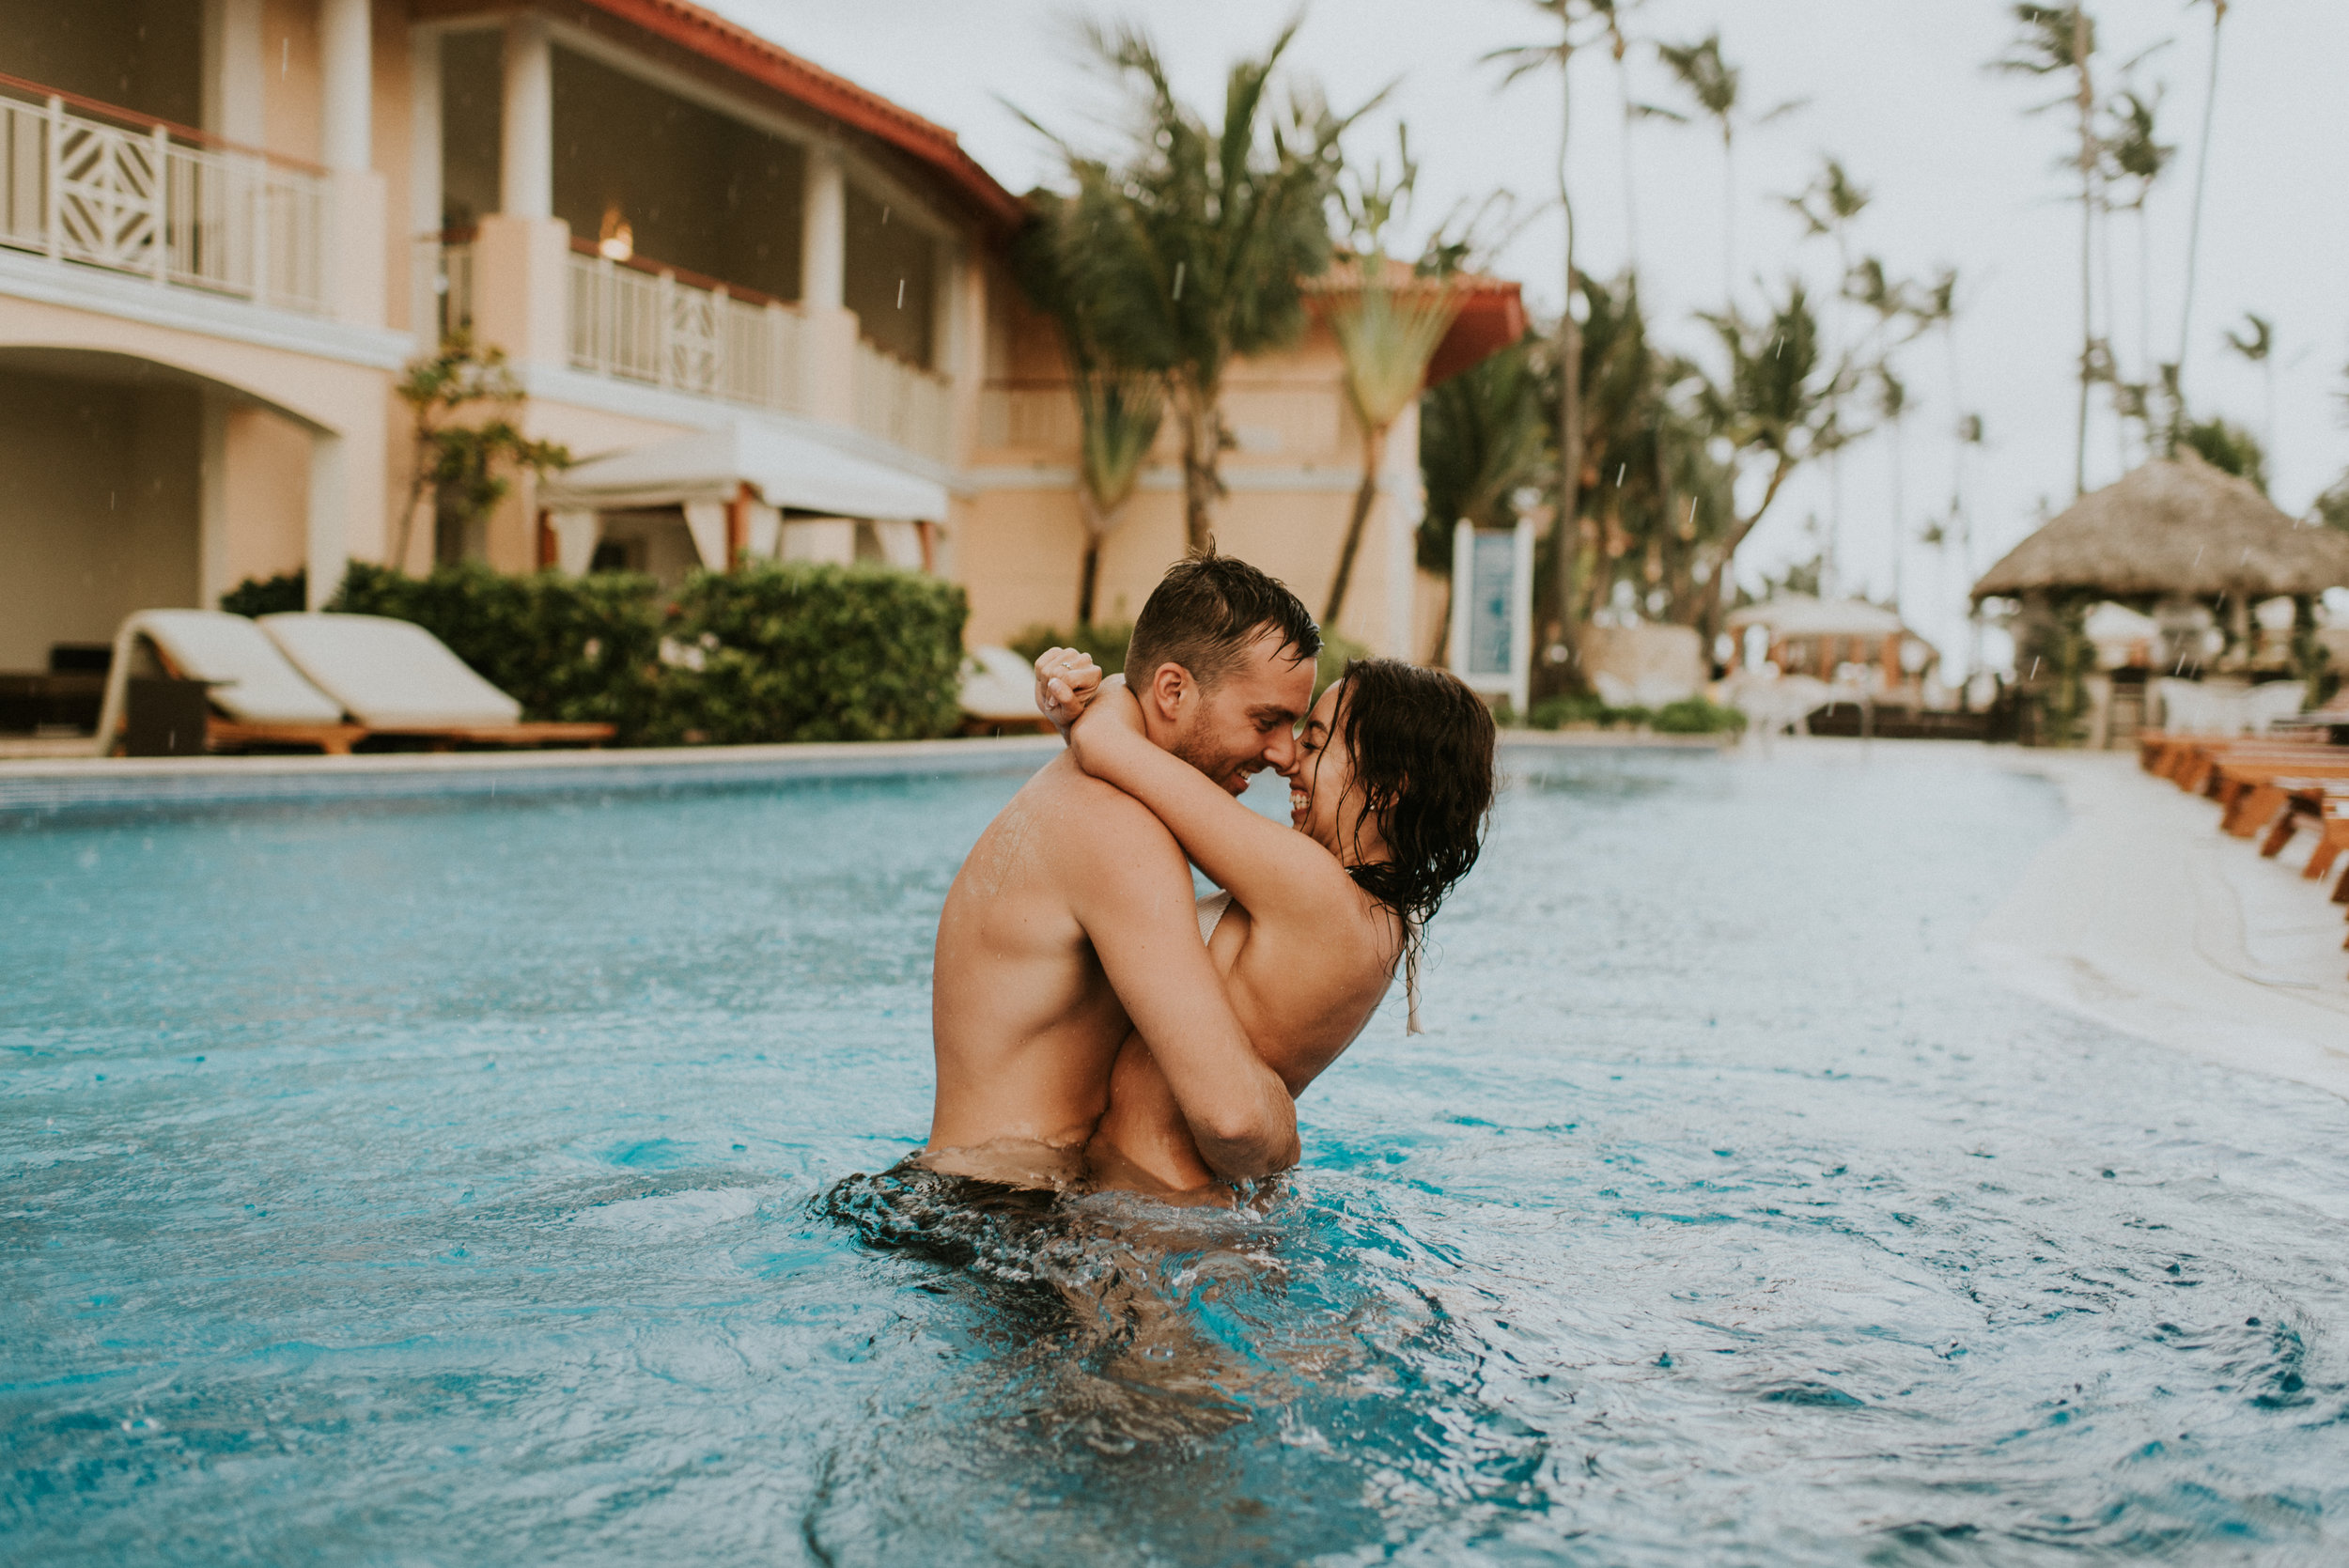 Amanda + Sean - Morning of Wedding Session - Day After Session - Punta Cana, Dominican Republic - Kamra Fuller Photography - Seattle Elopement Photographer - Destination Wedding Photographer